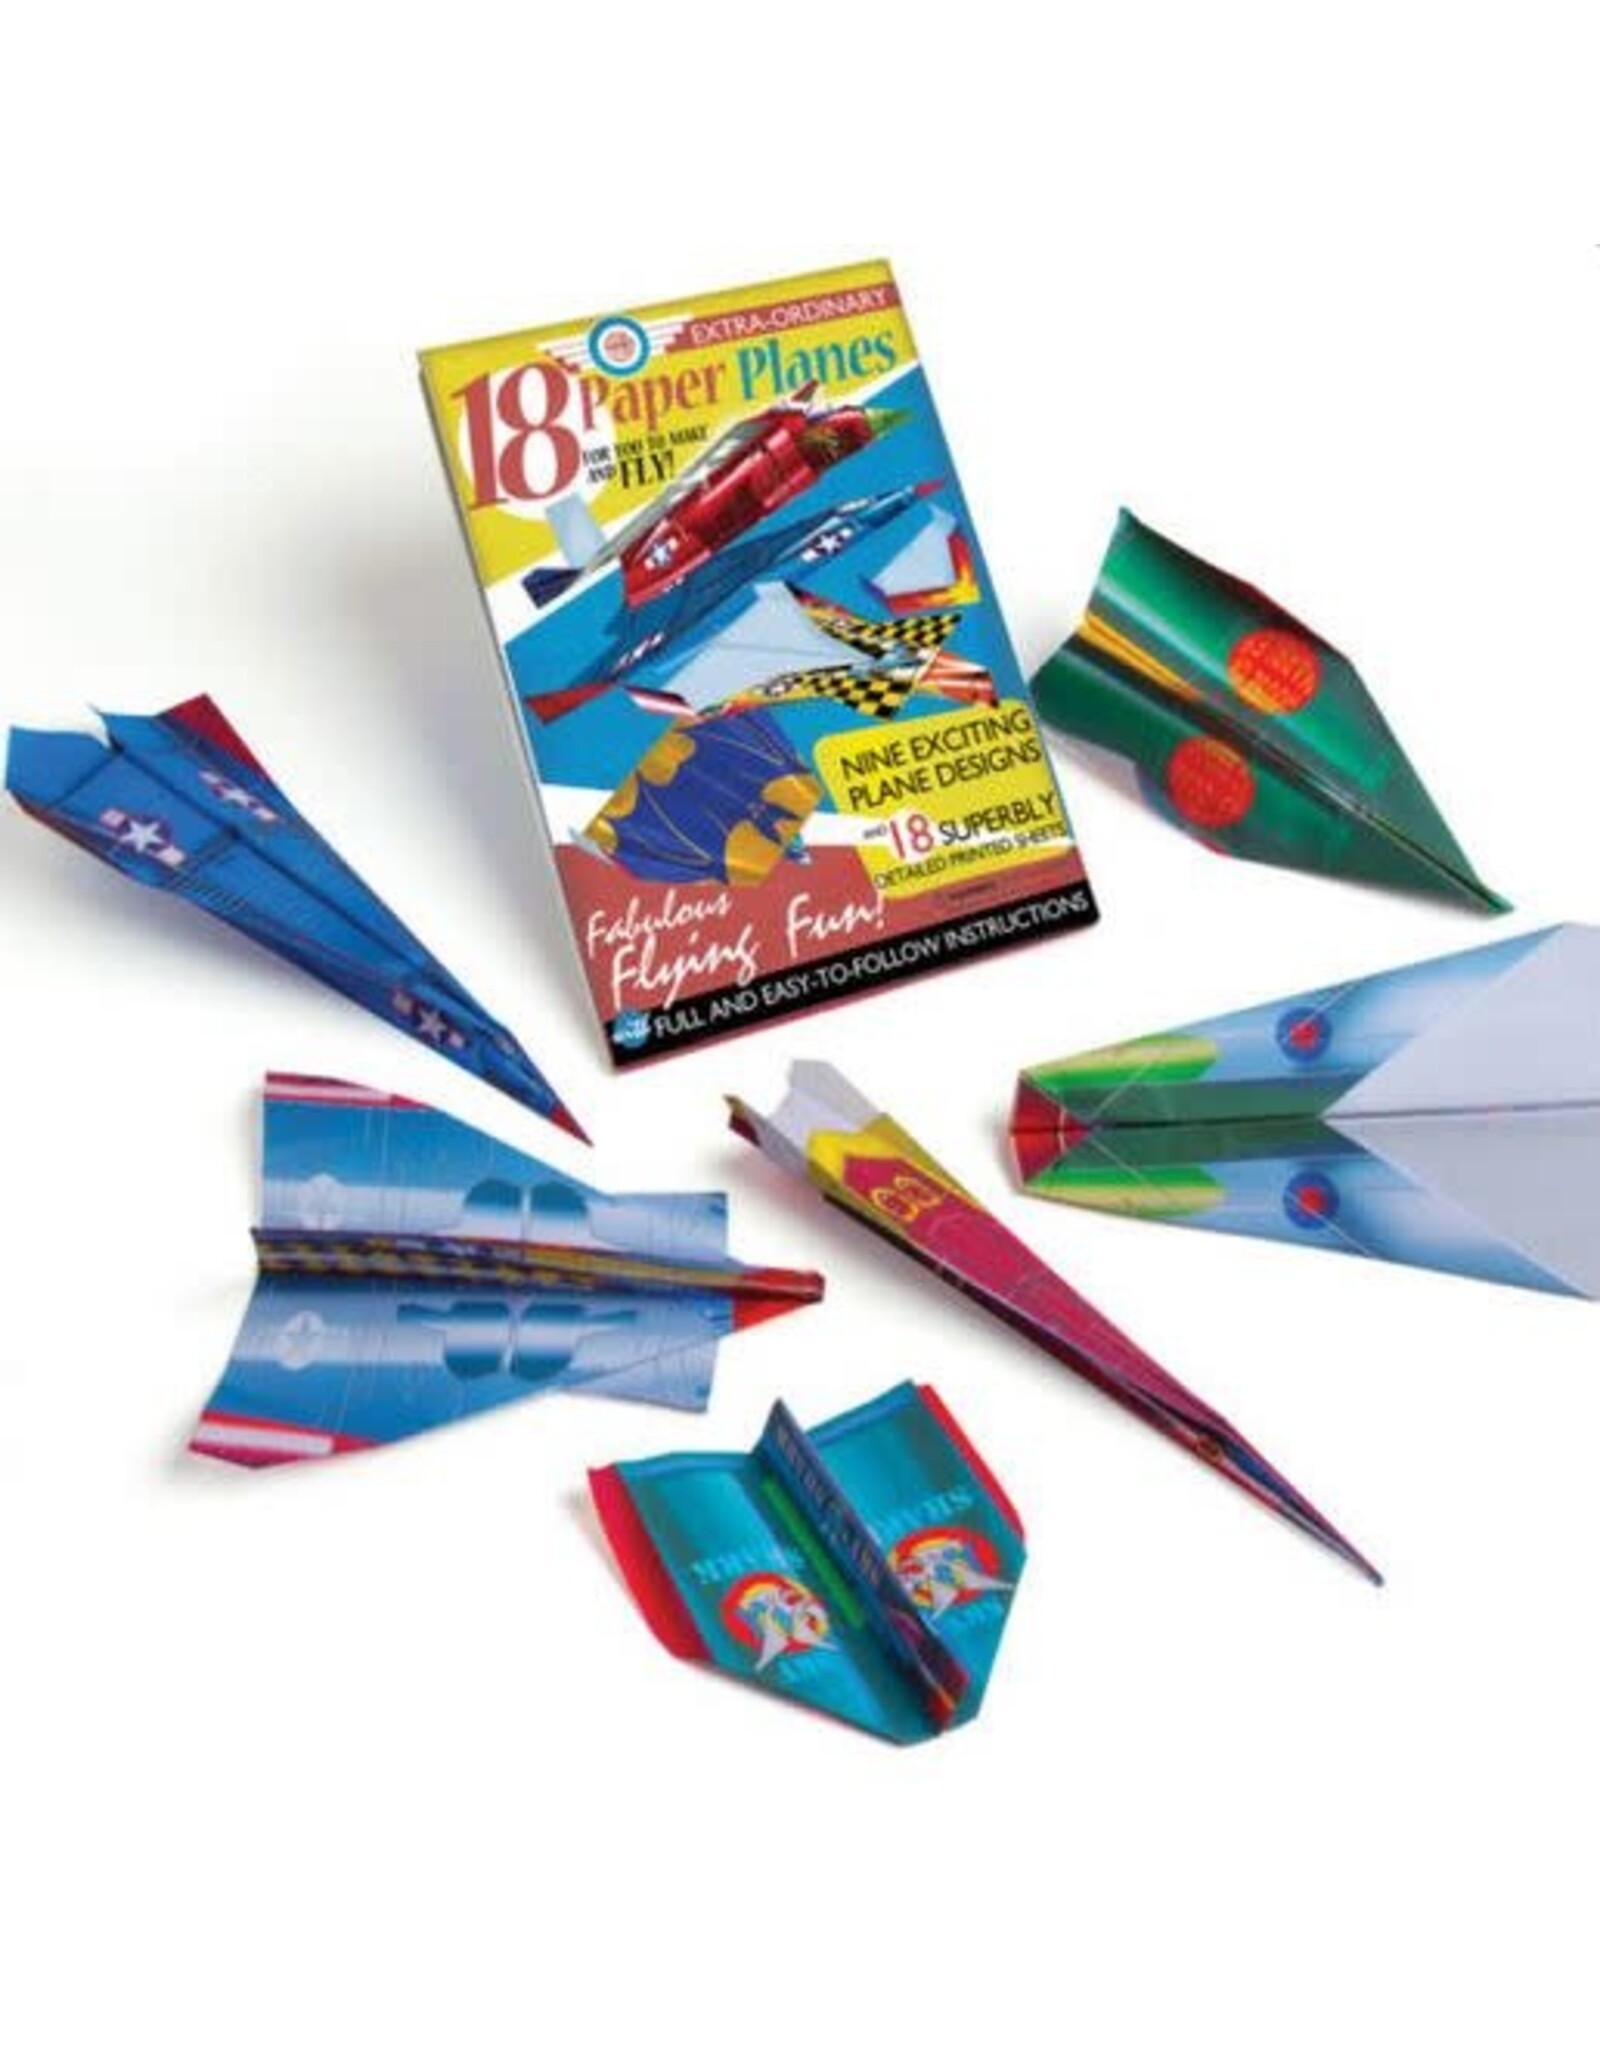 House of Marbles Make Your Own Paper Planes